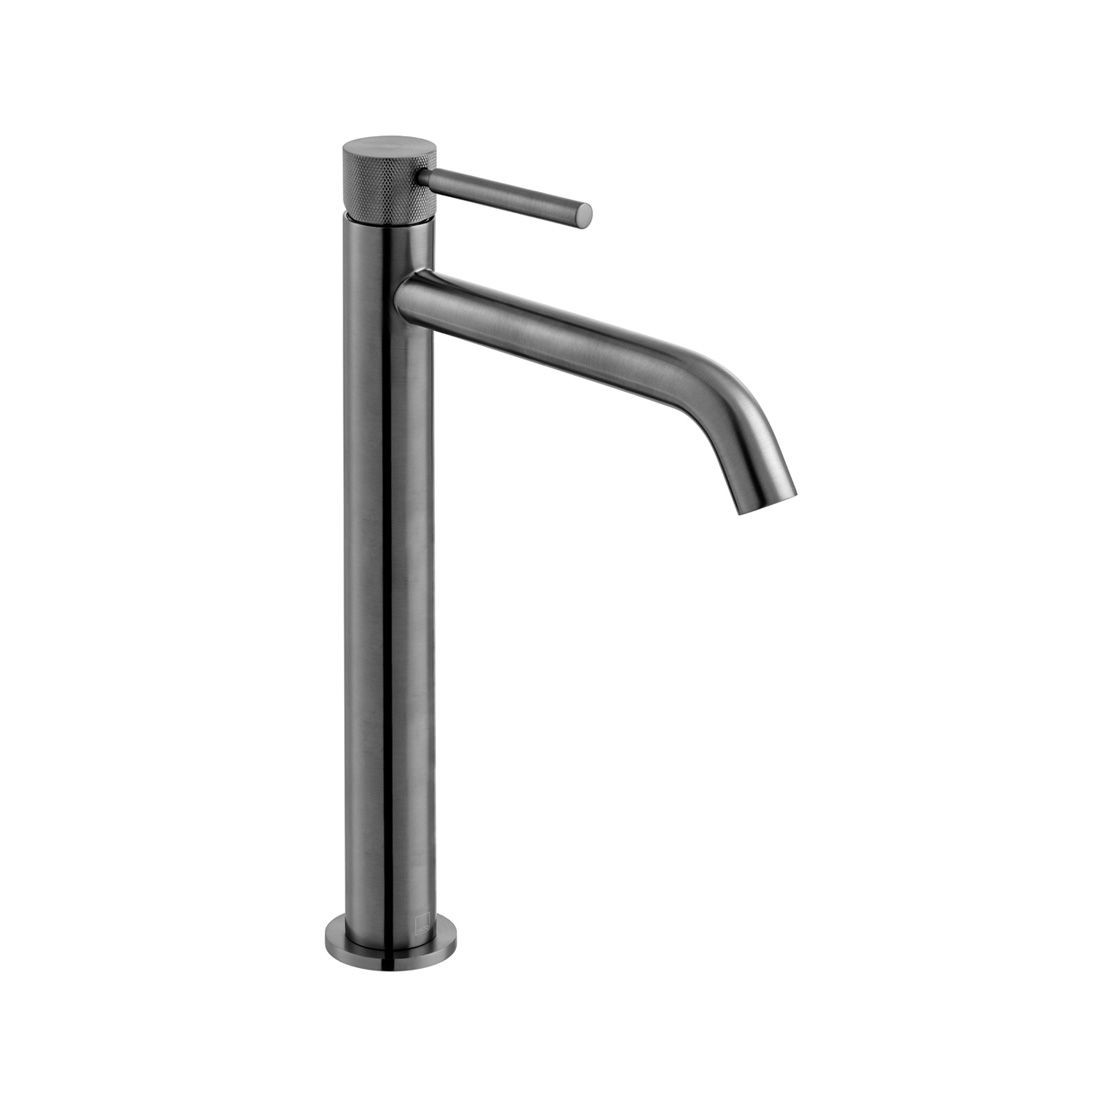 Individual by Vado Origins Slimline Tall Mono Basin Mixer Tap with Knurled Accents (Single Taphole) Brushed Black [IND-ORI200E/SB-BLKK]